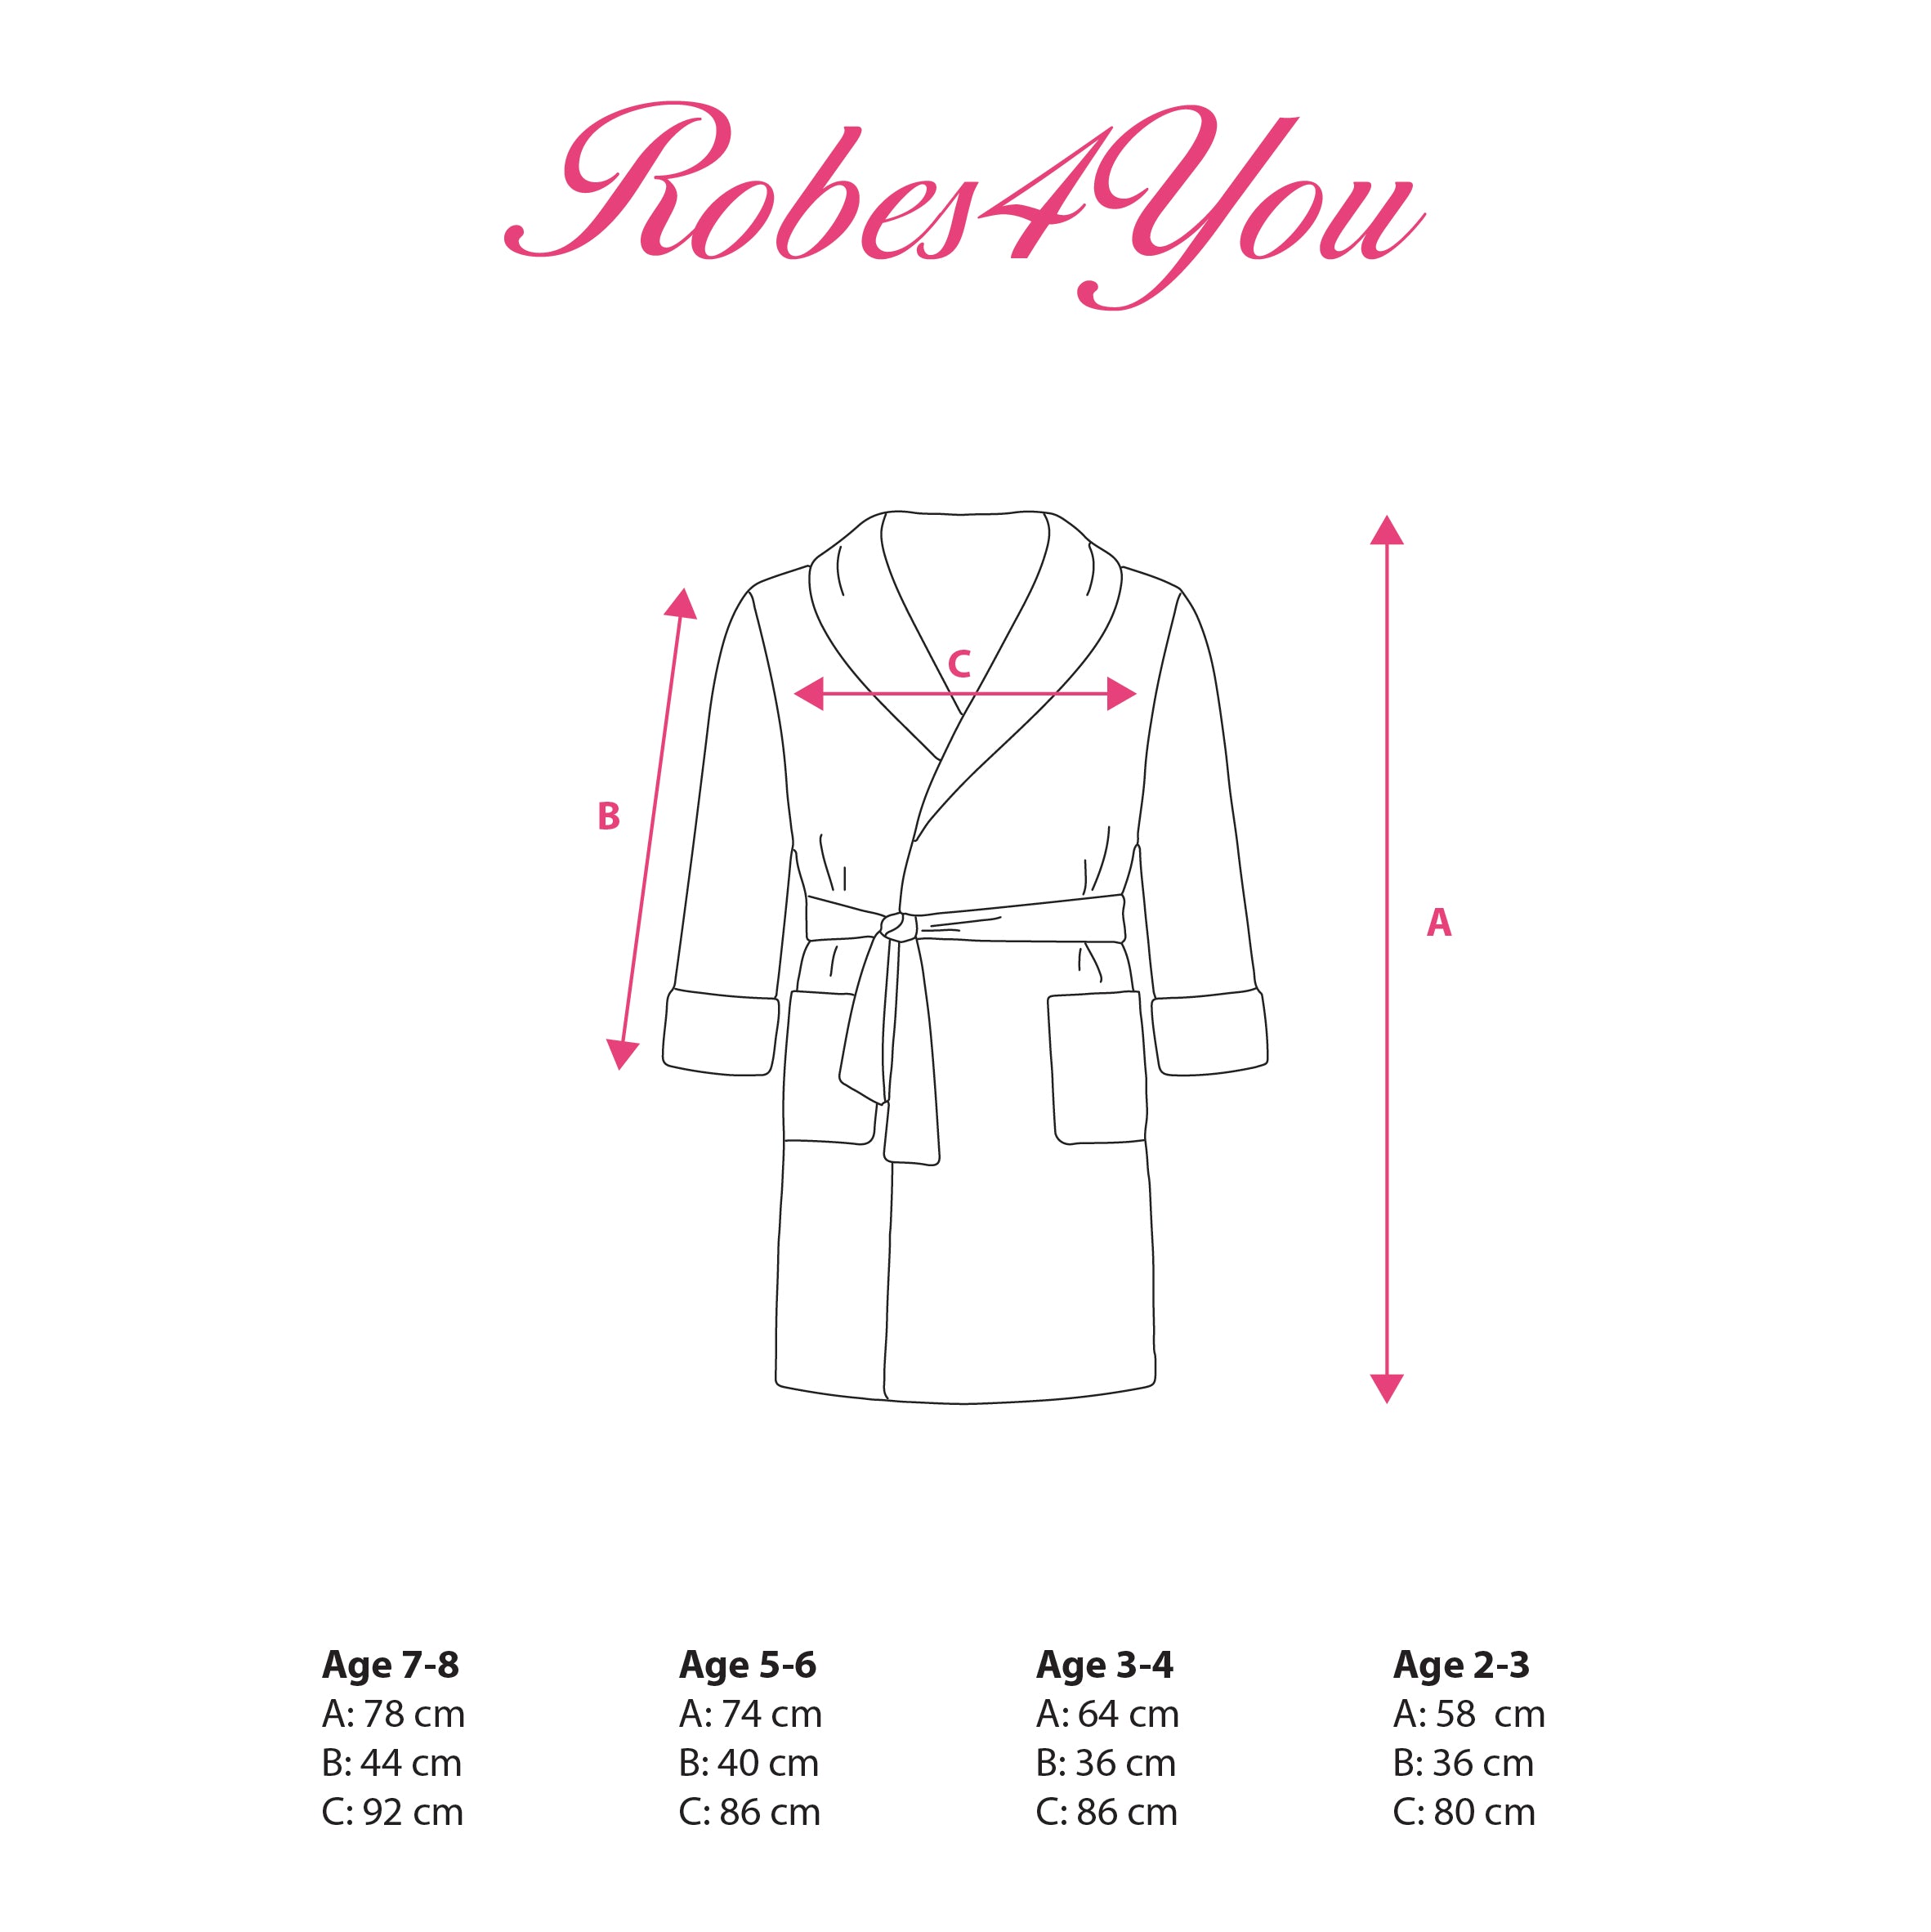 children's robes sizing-robes4you